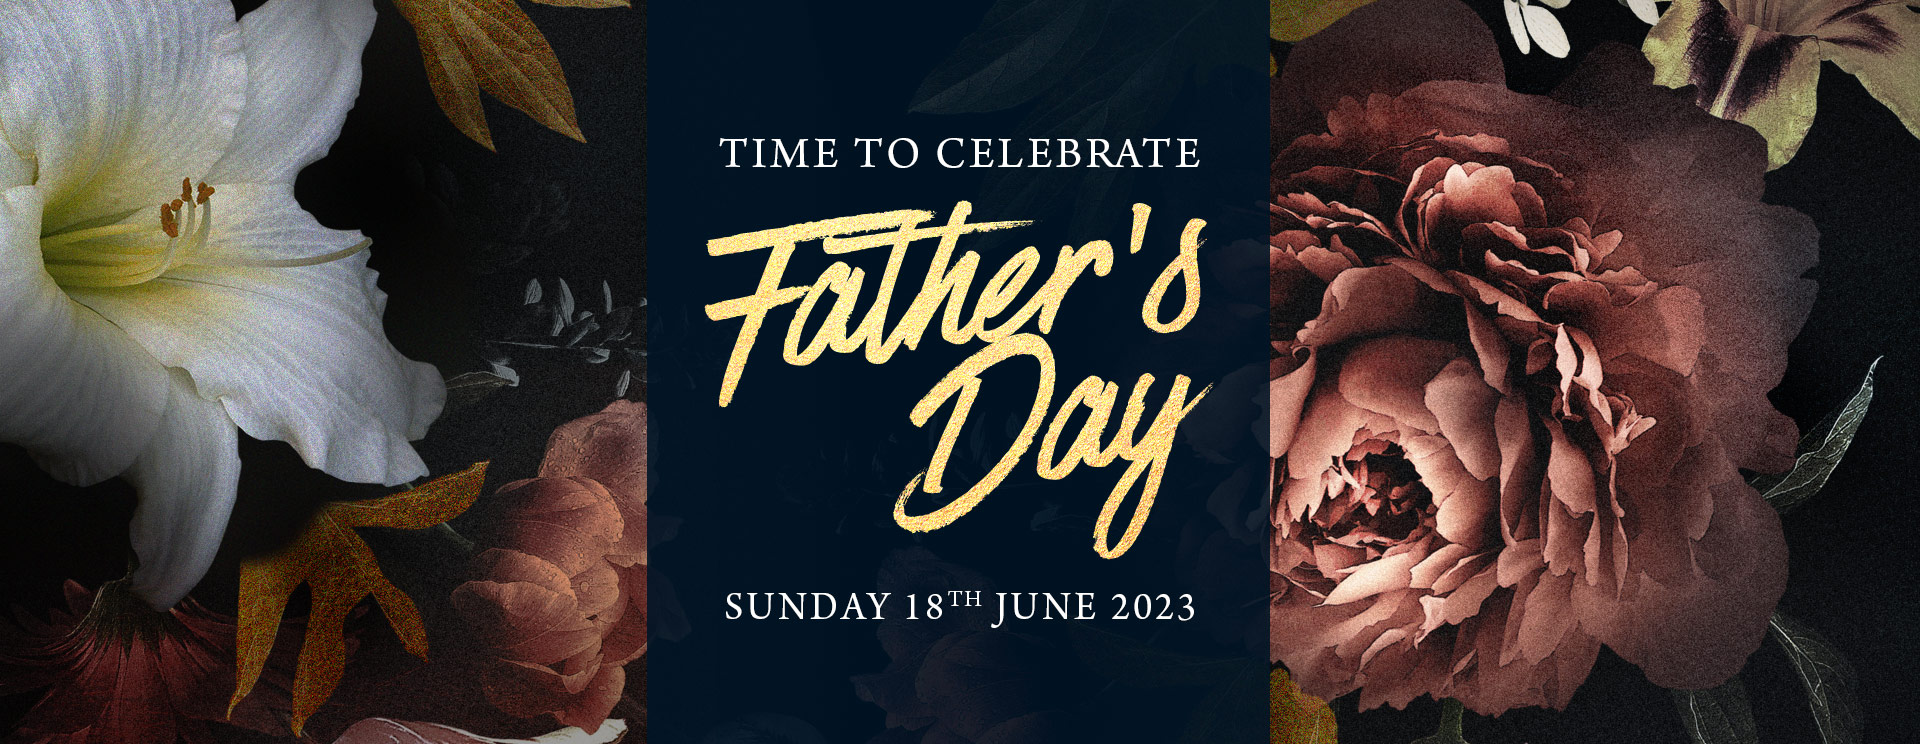 Fathers Day at The Anchor Inn